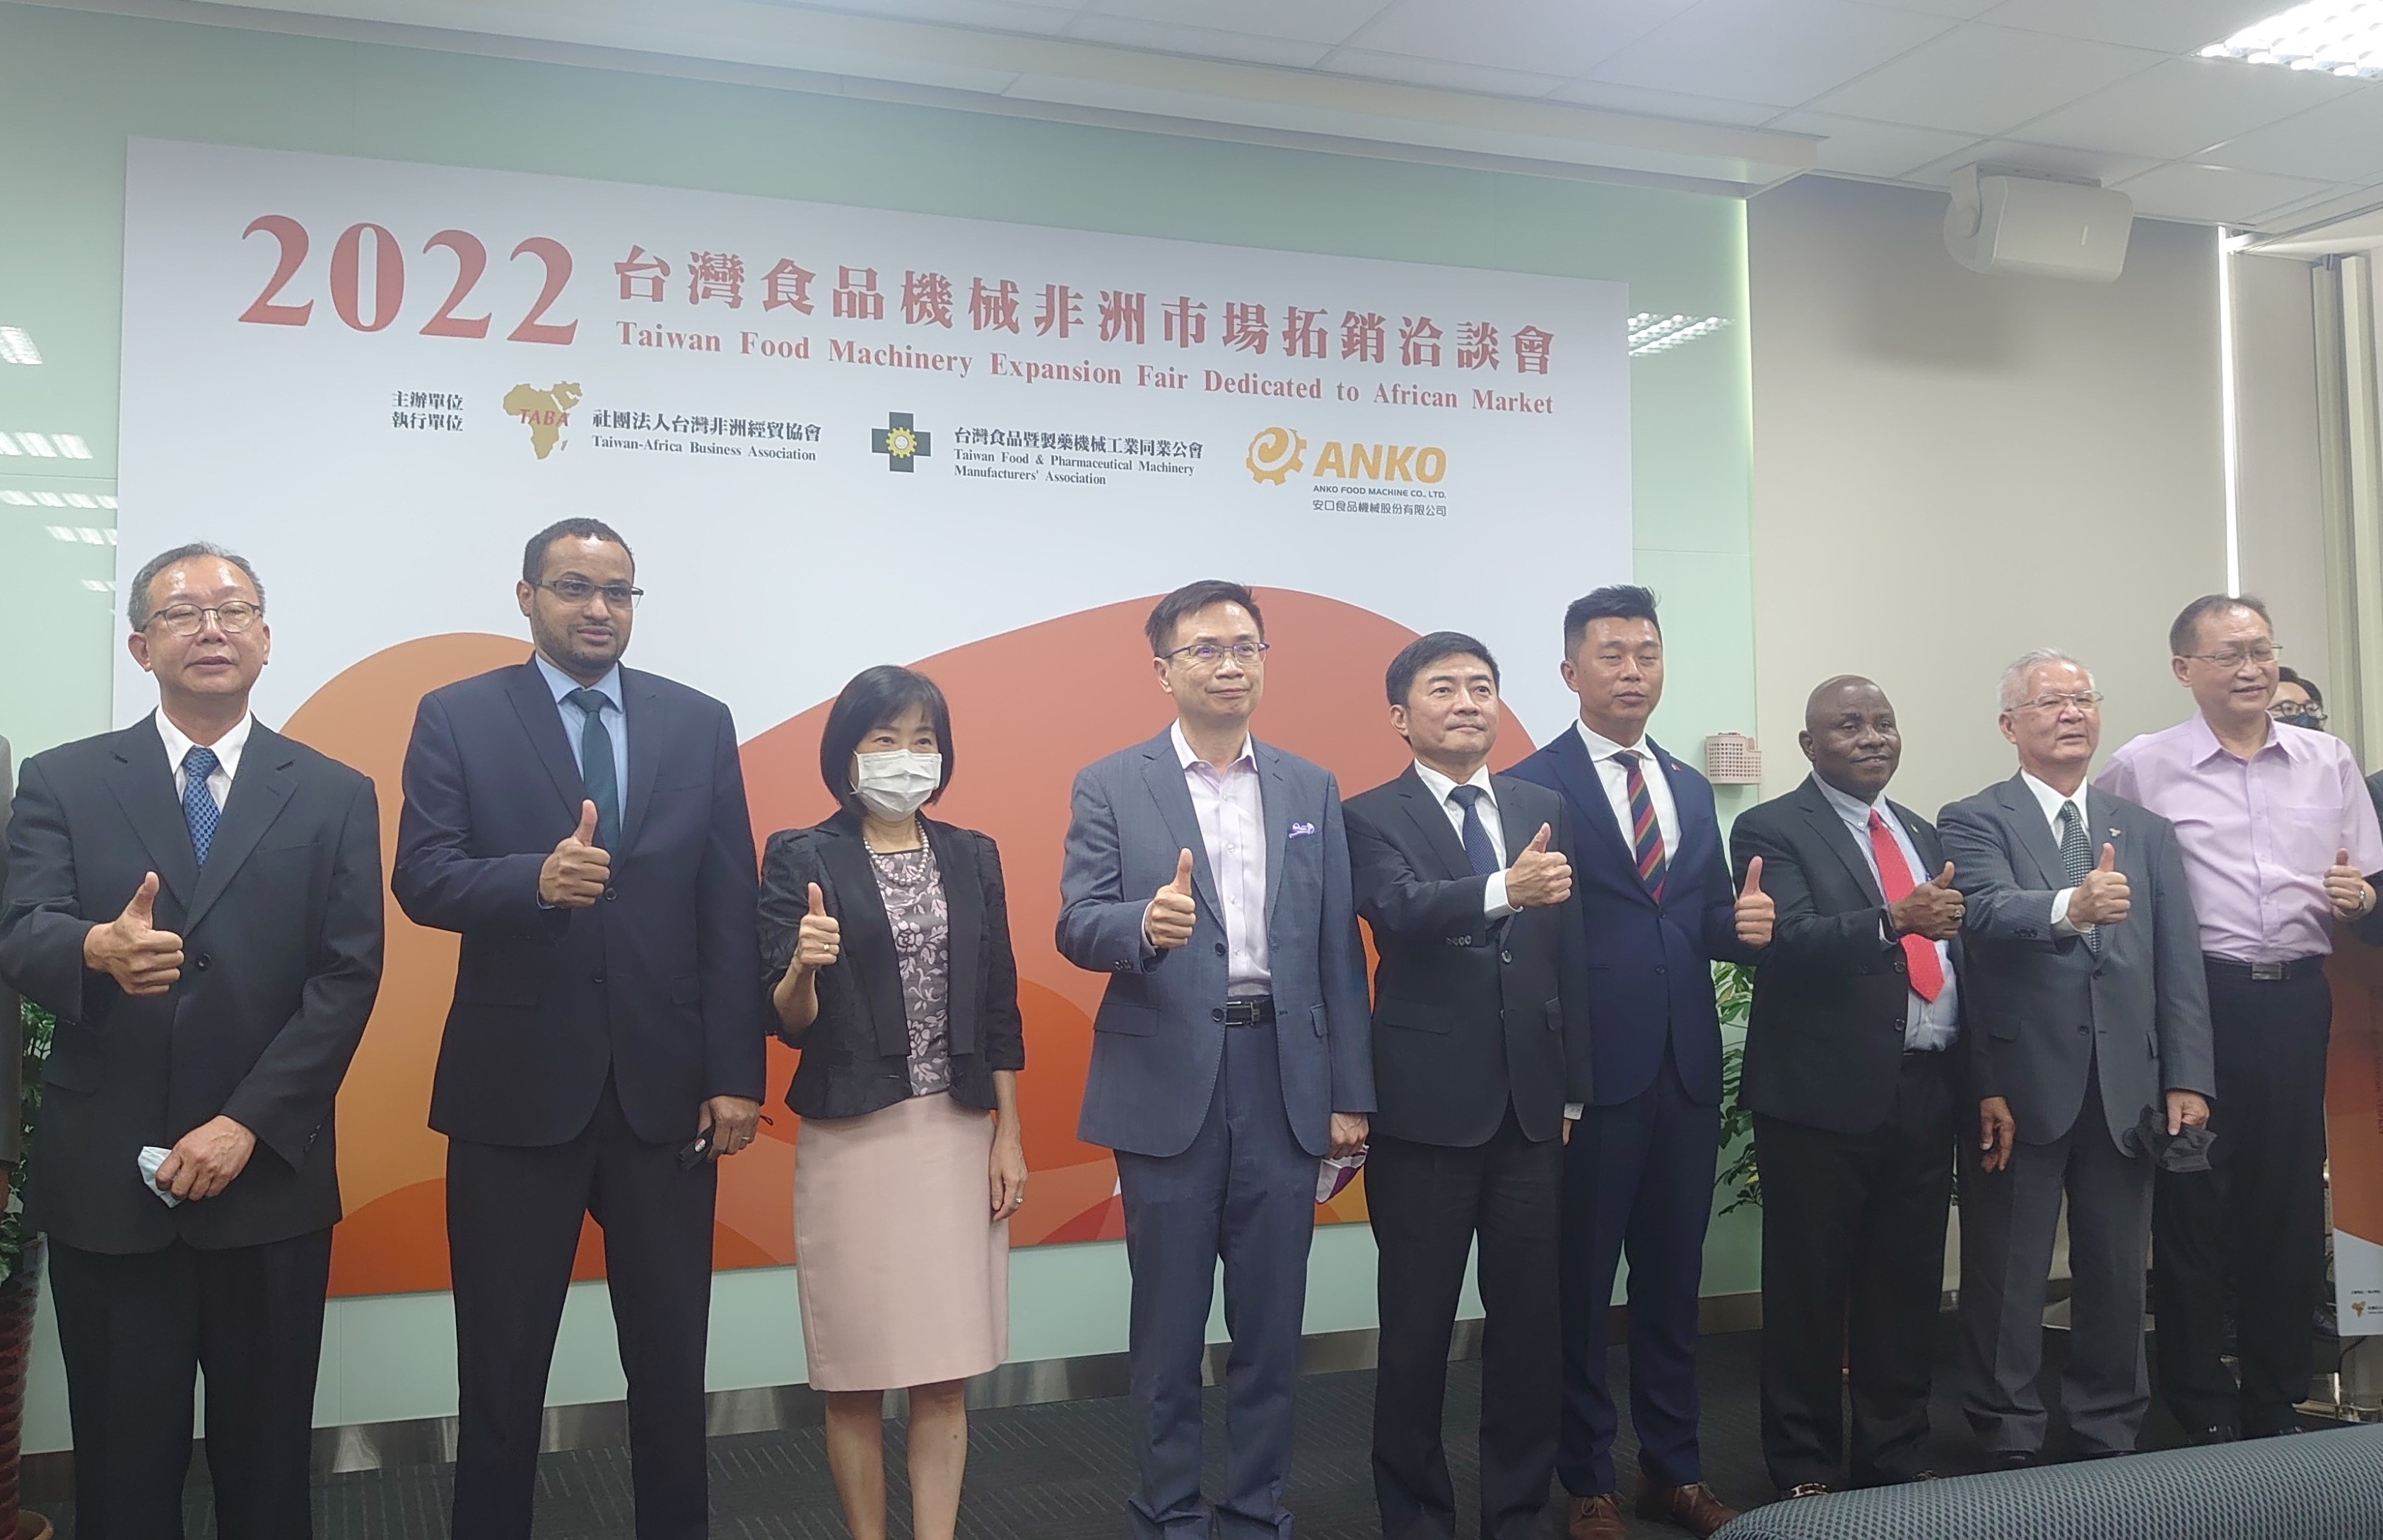 BOFT Director Jiang made a speech on “Taiwan Food Machinery Marketing Meeting on Trade Promotion in African Countries”